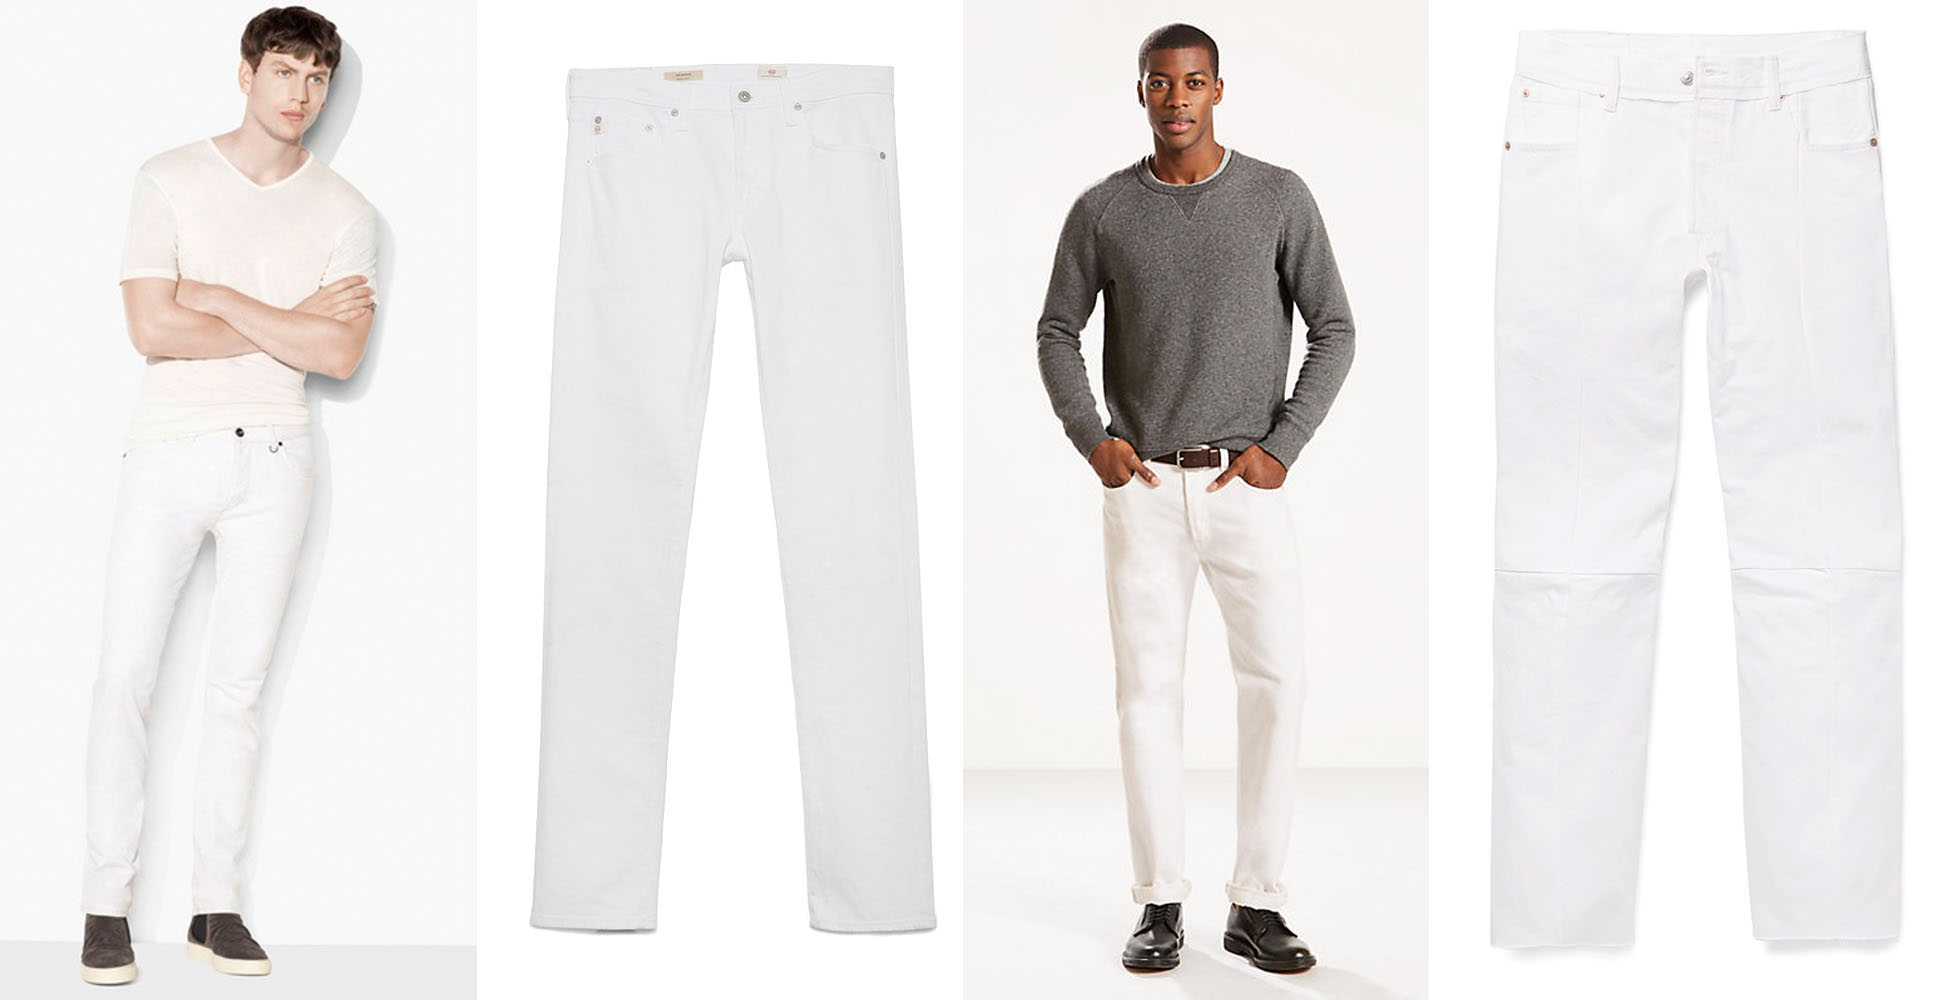 Are white pants considered tacky? - Quora